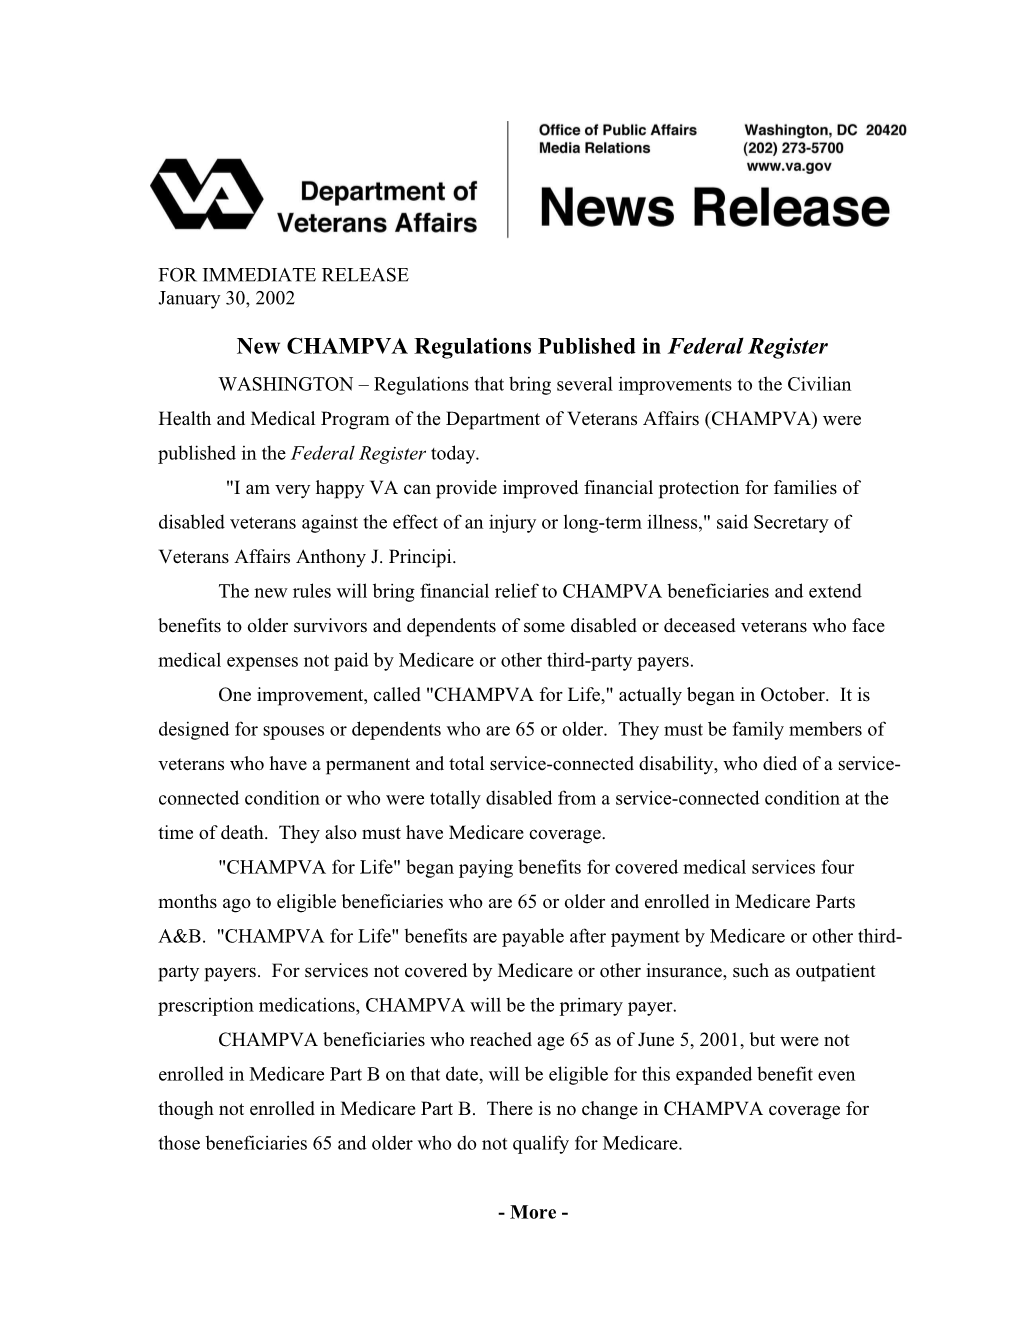 New CHAMPVA Regulations Published in Federal Register